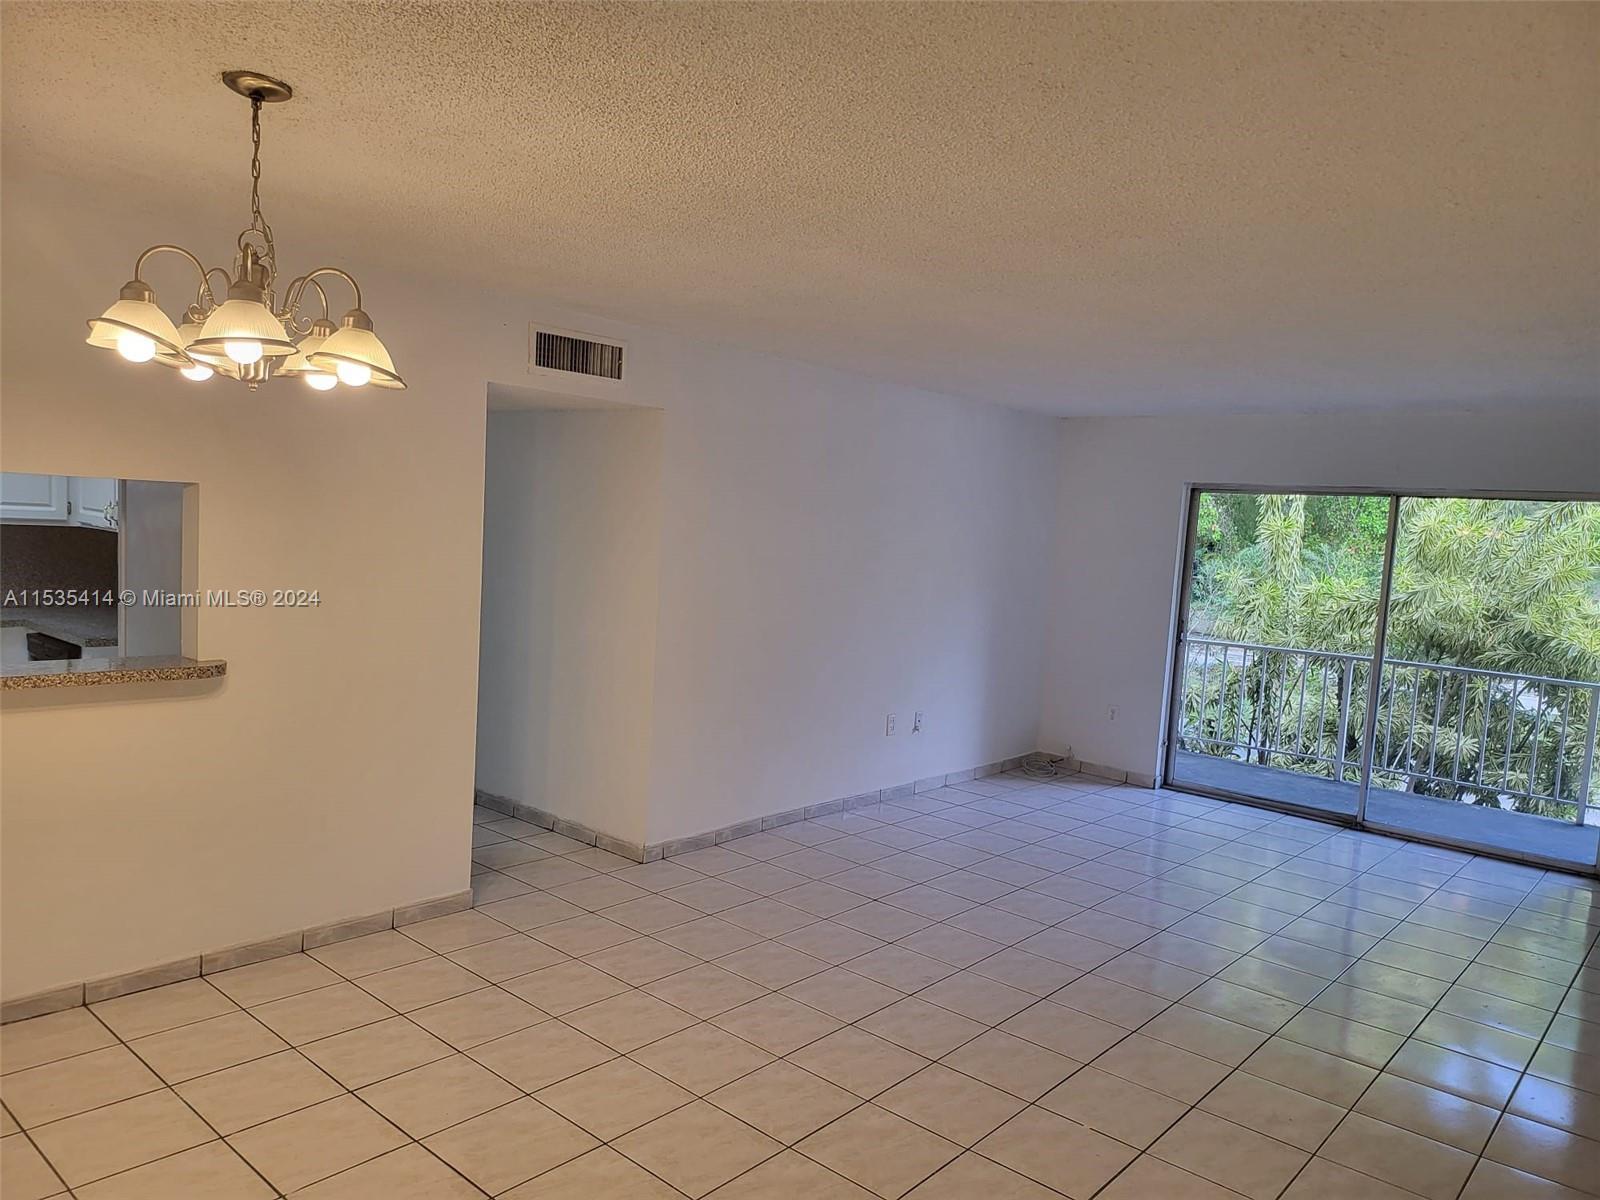 Great opportunity to buy a 3 bedroom 2 bath apartment in a gated community.  Large master bedroom wi